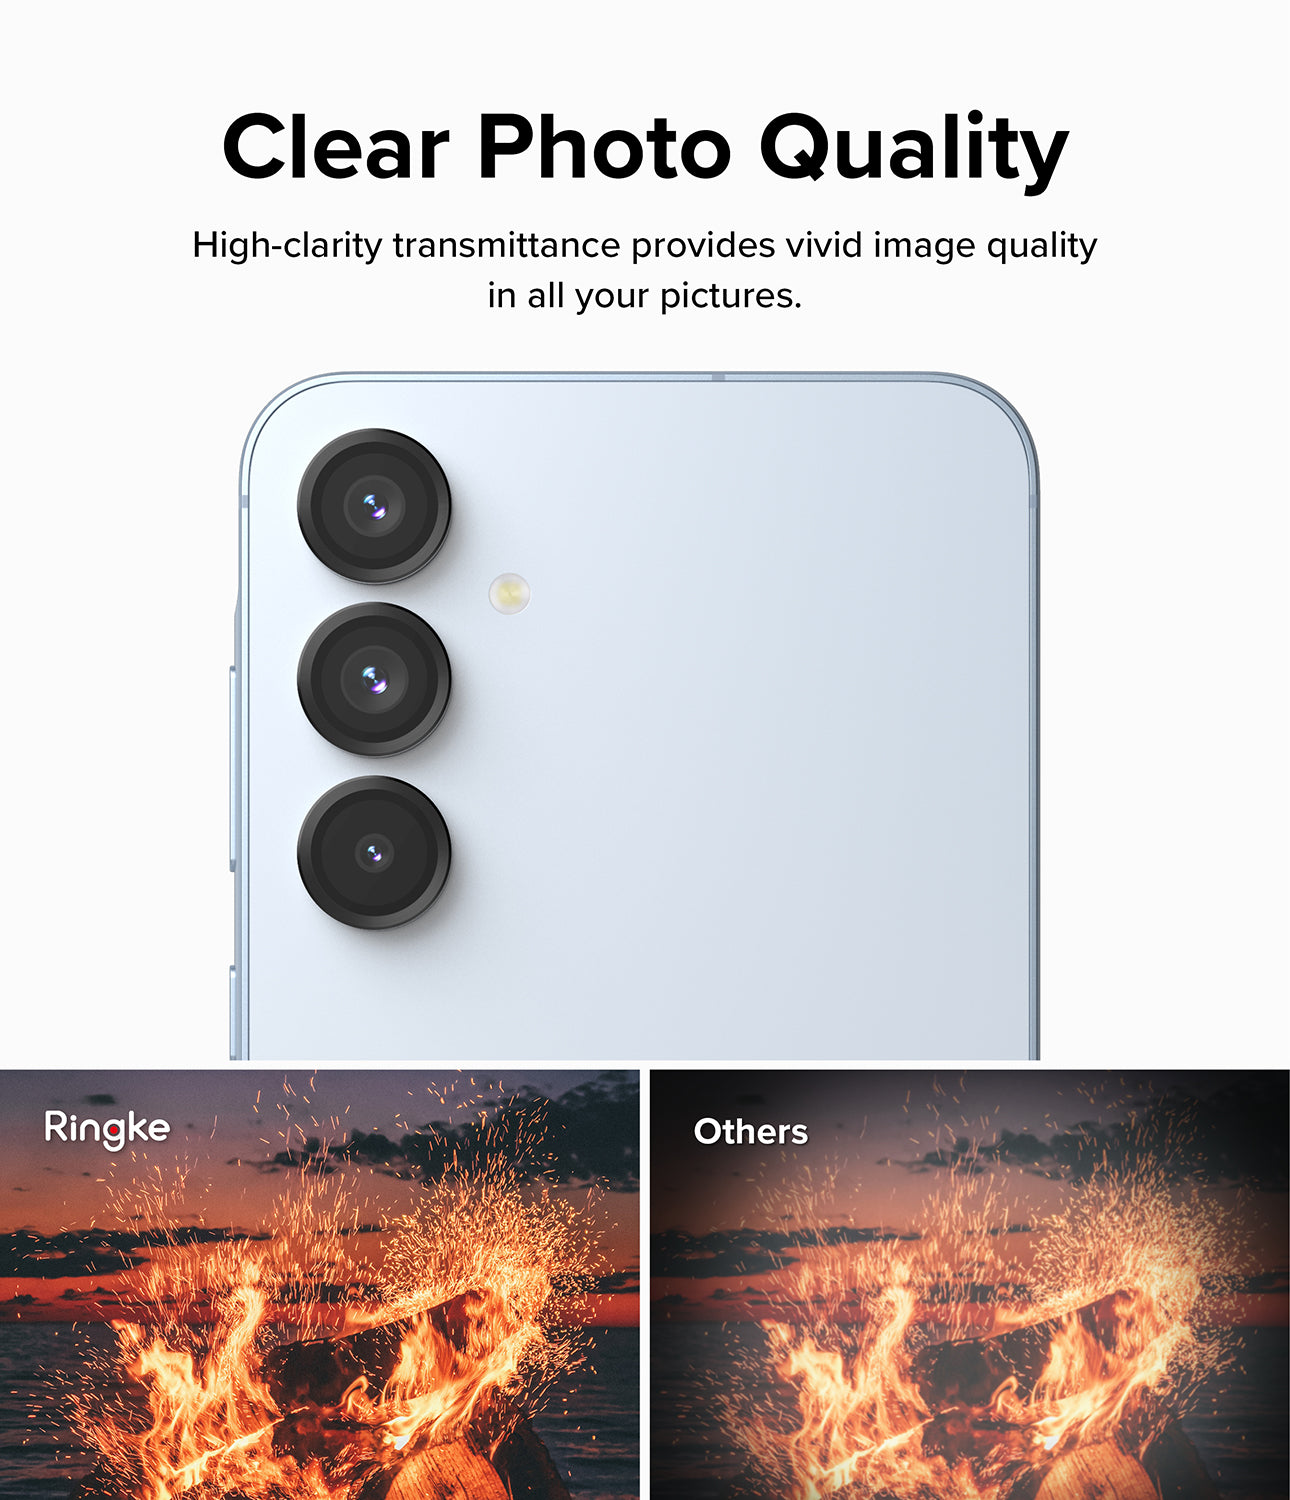 Galaxy A55 / A35 Camera Lens Frame Glass Protector - Clear Photo Quality. High-clarity transmittance provides vivid image quality in all your pictures.